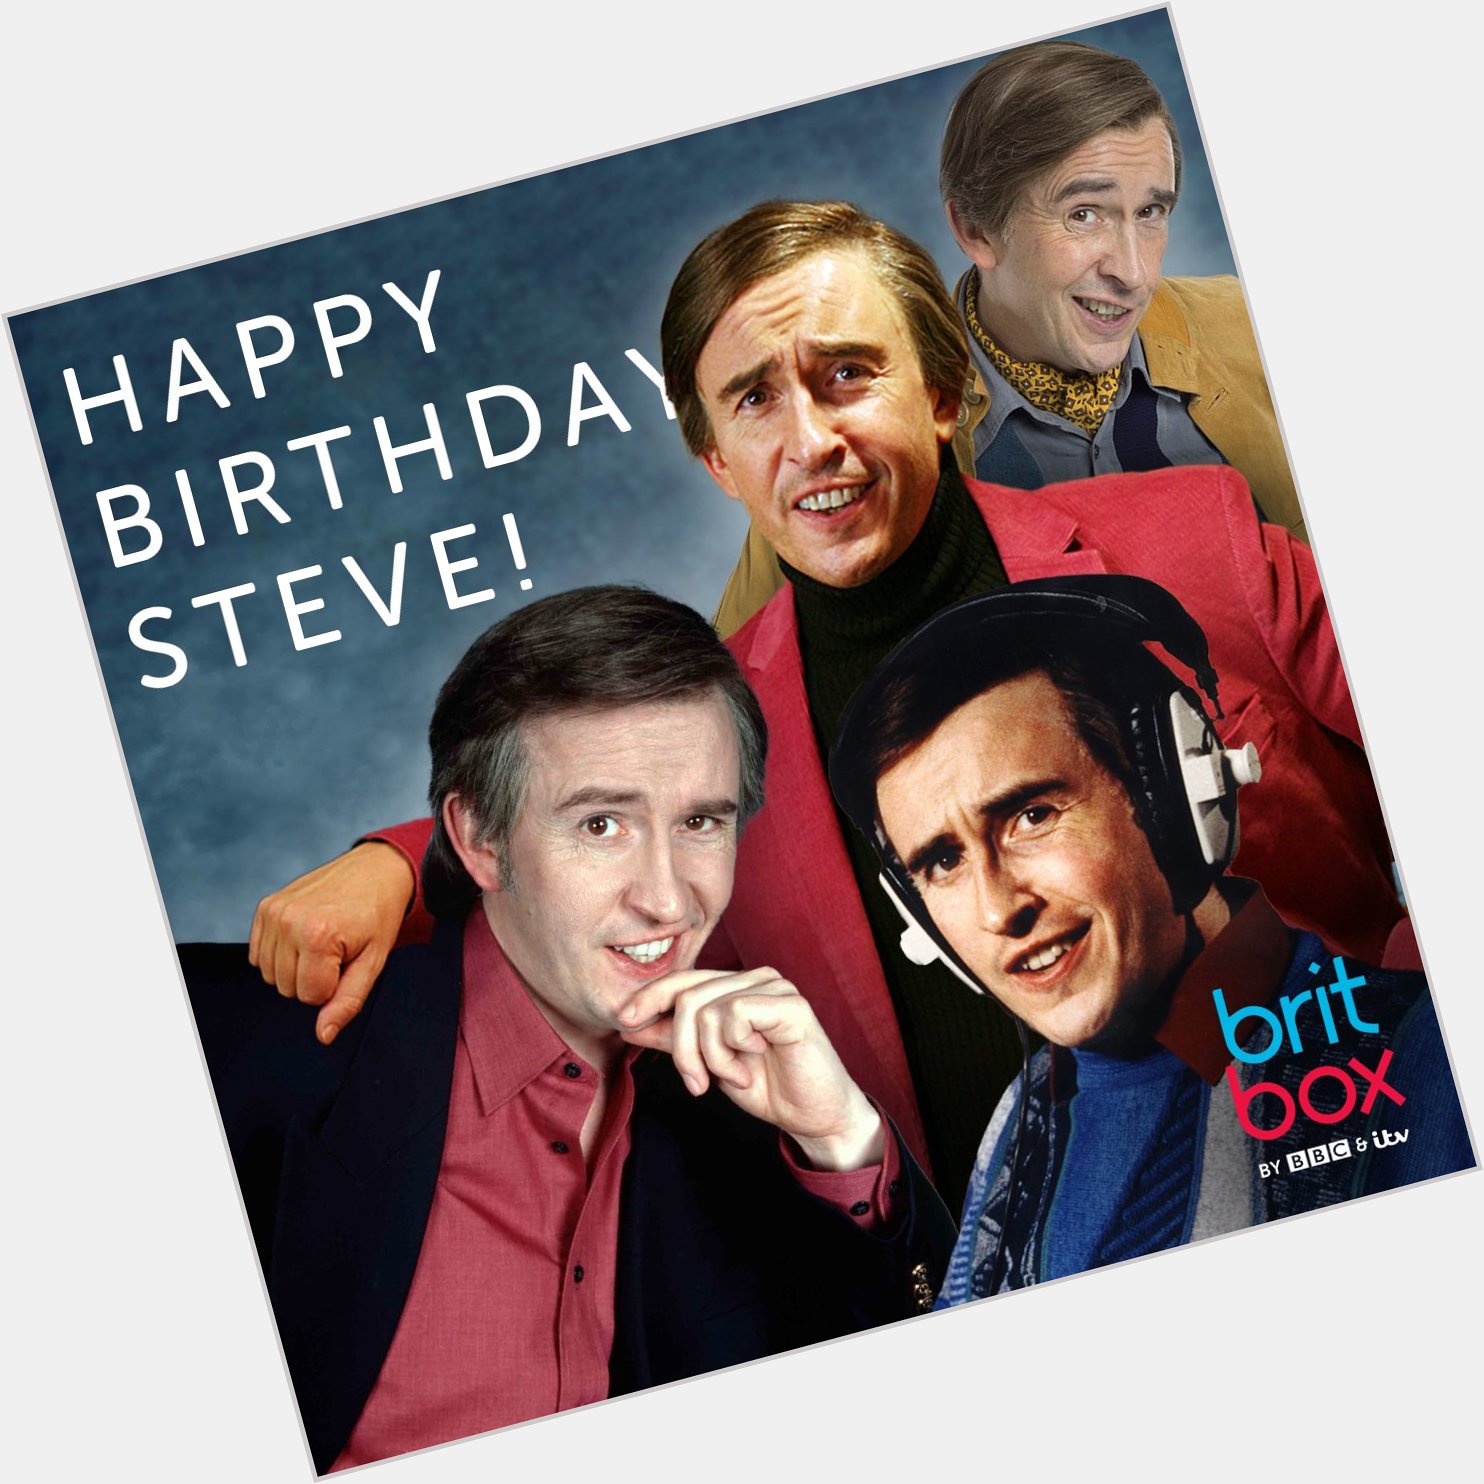 Happy birthday, Steve Coogan! May you continue to provide us with many more laughs 